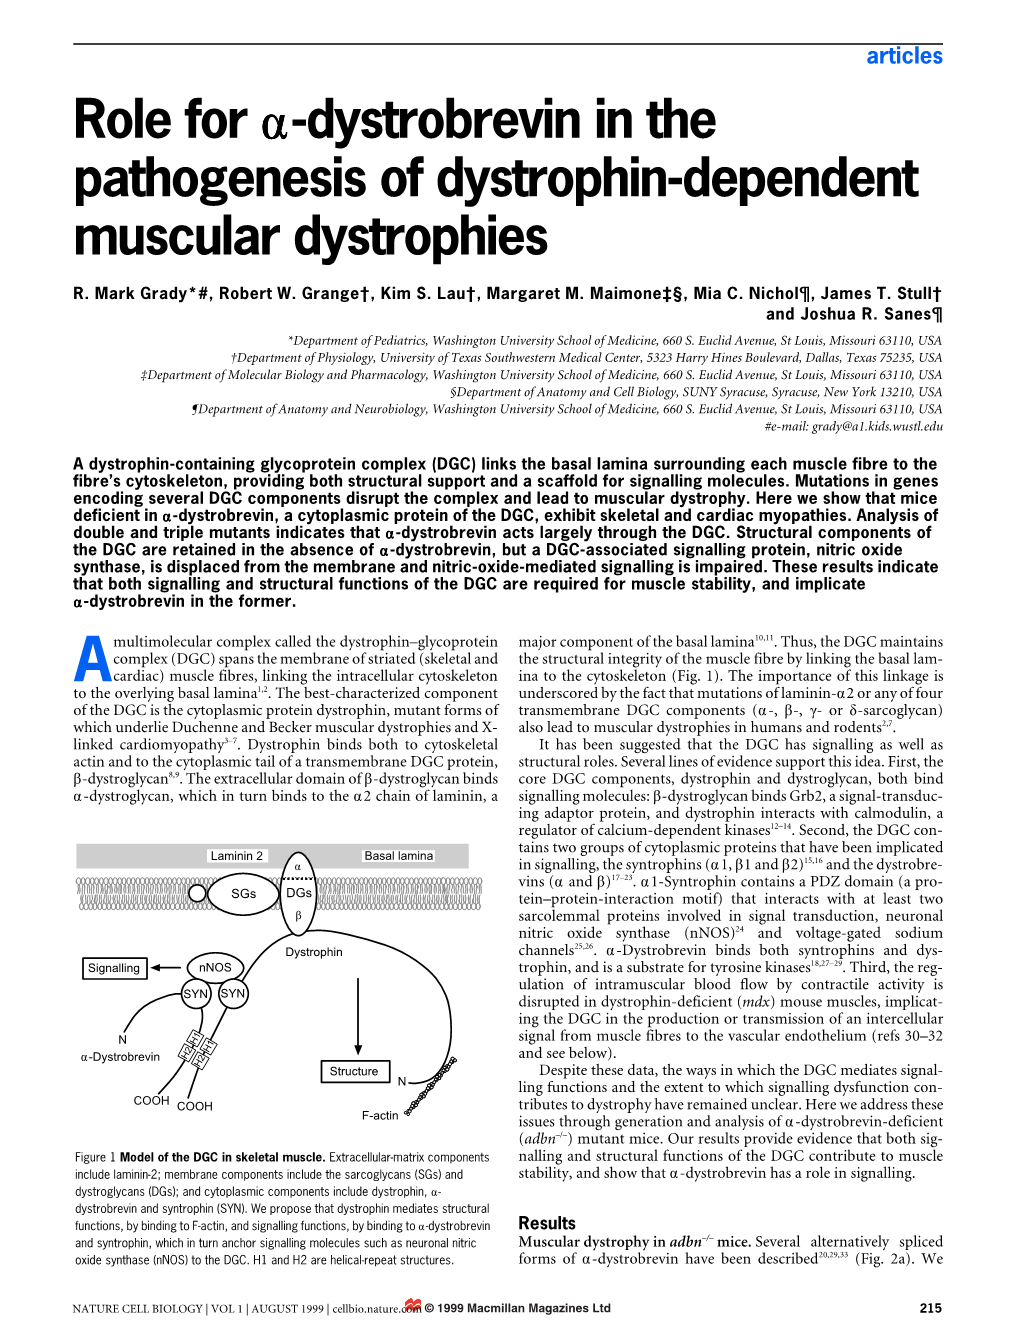 Role for Α-Dystrobrevin in the Pathogenesis of Dystrophin-Dependent Muscular Dystrophies